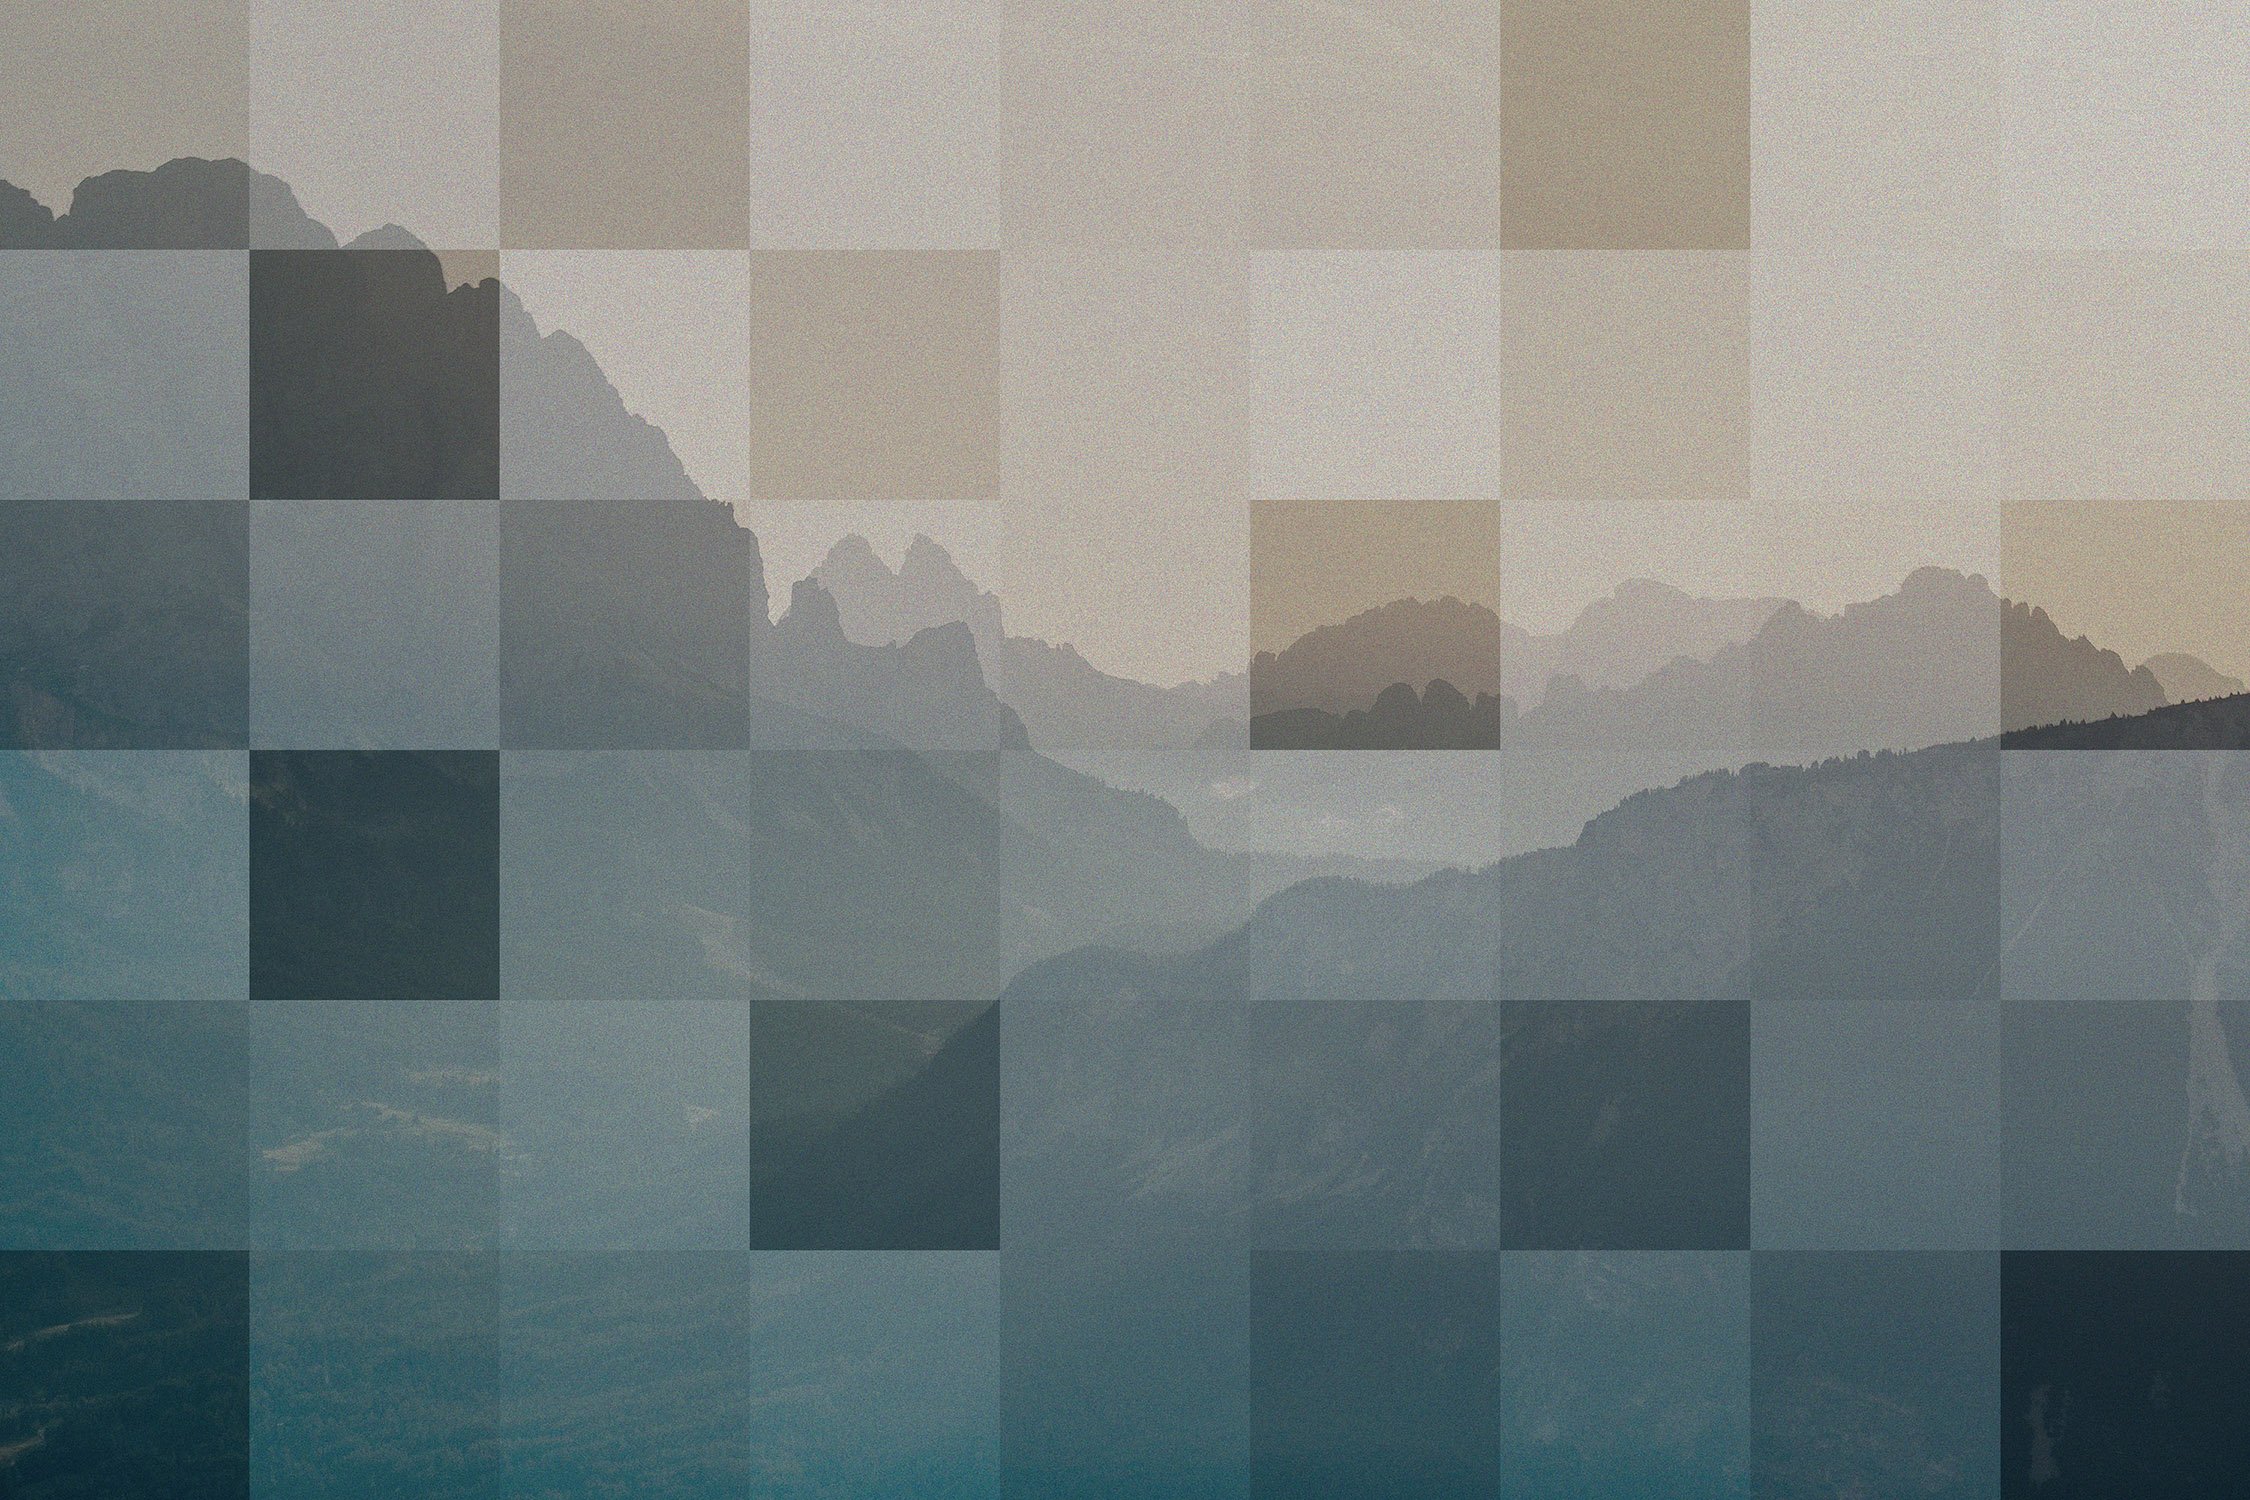 Checkered Pixelated Effectpreview image.